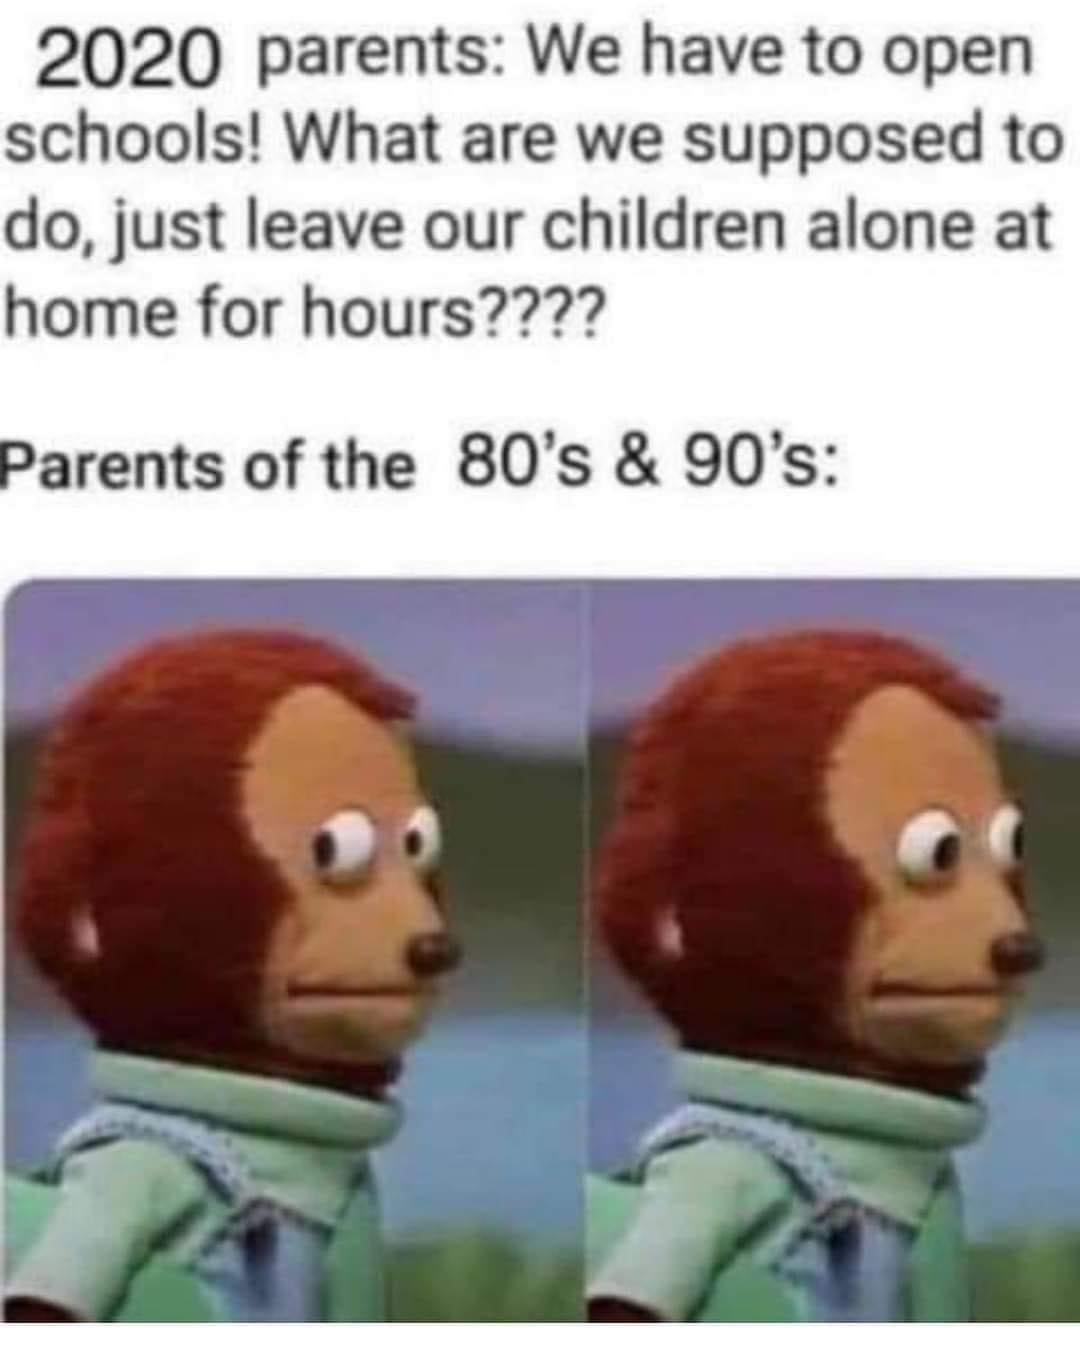 parents of the 90s meme - 2020 parents We have to open schools! What are we supposed to do, just leave our children alone at home for hours???? Parents of the 80's & 90's